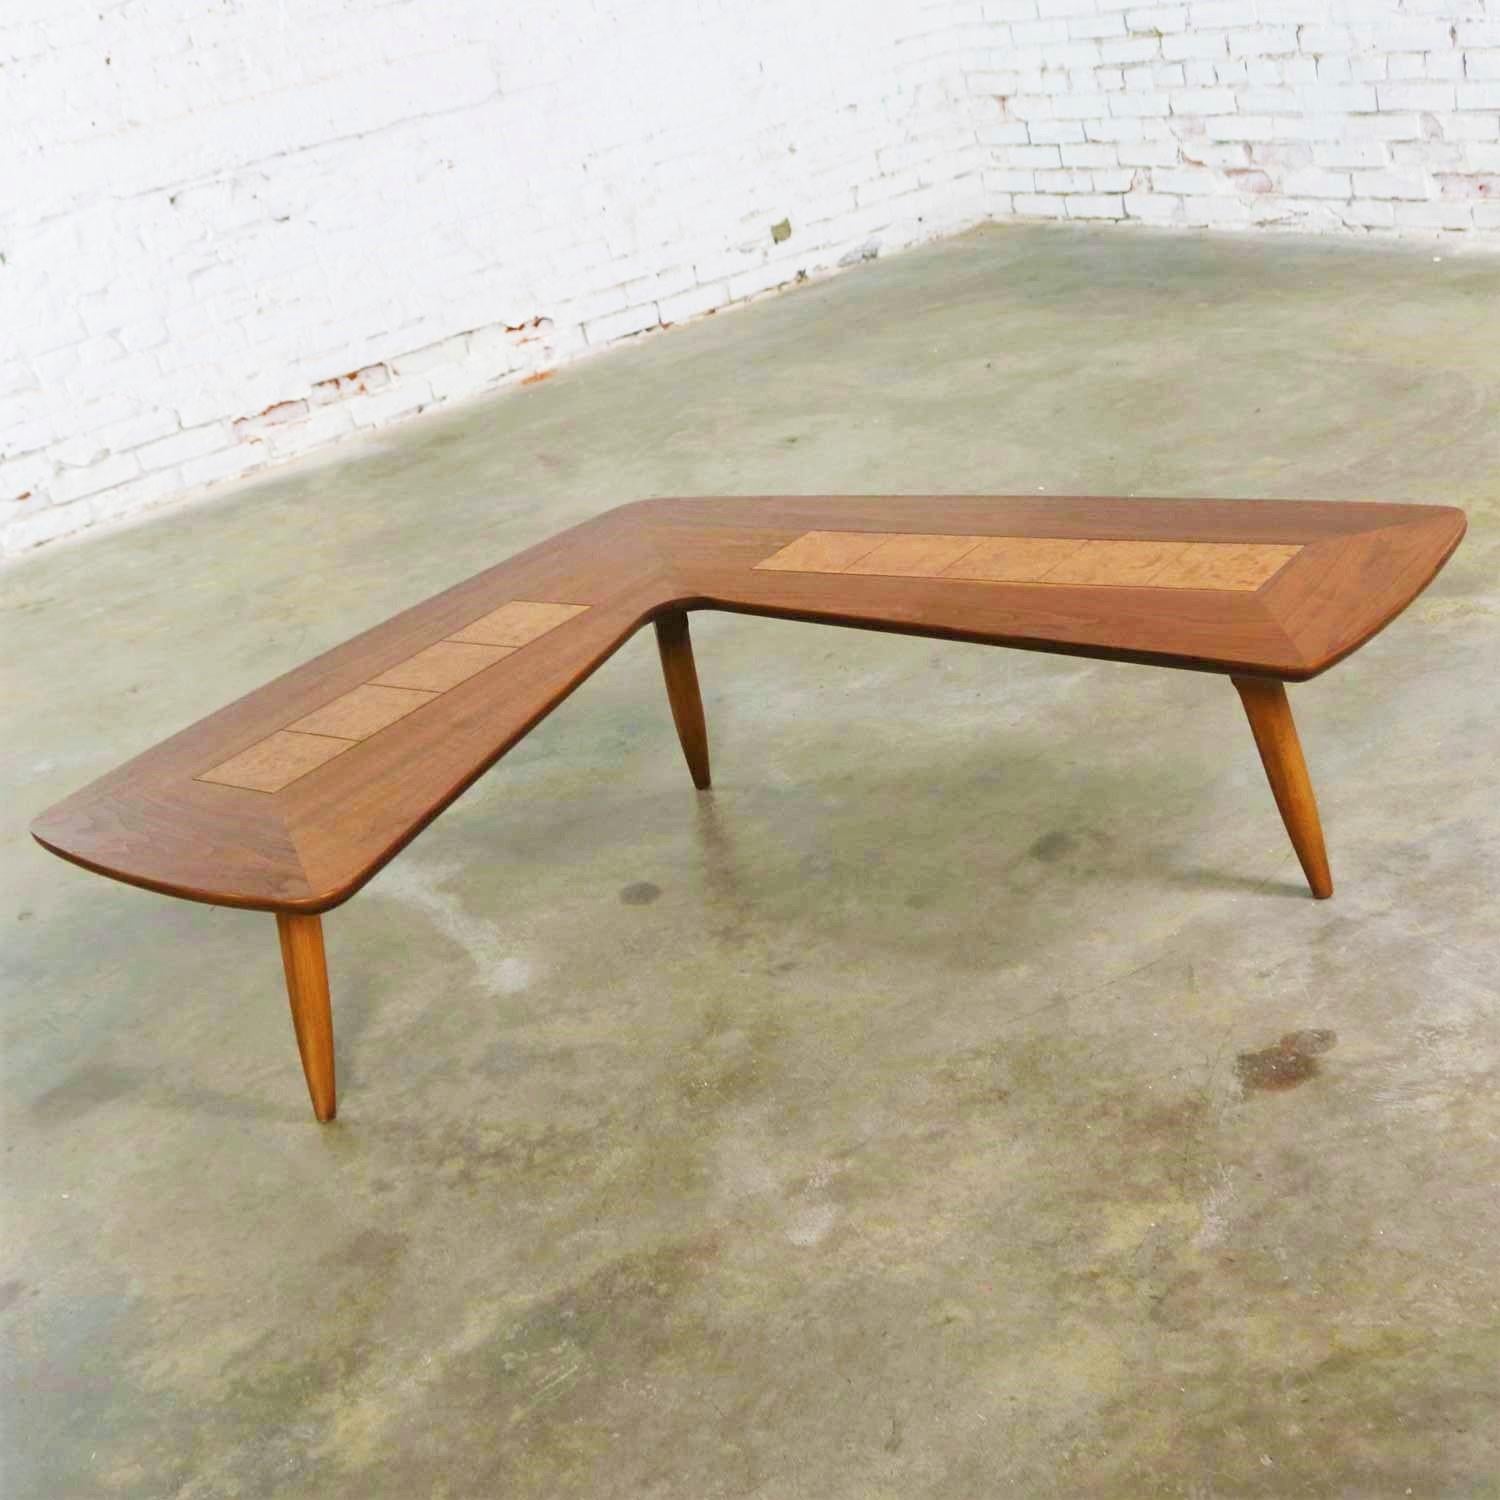 Amazing Mid-Century Modern lane Alta Vista boomerang or L-shaped coffee table style #1929 with inlaid burl squares in its center. It is in wonderful condition having been refinished and a repair made to the veneer. Please see photos. Dated on bottom